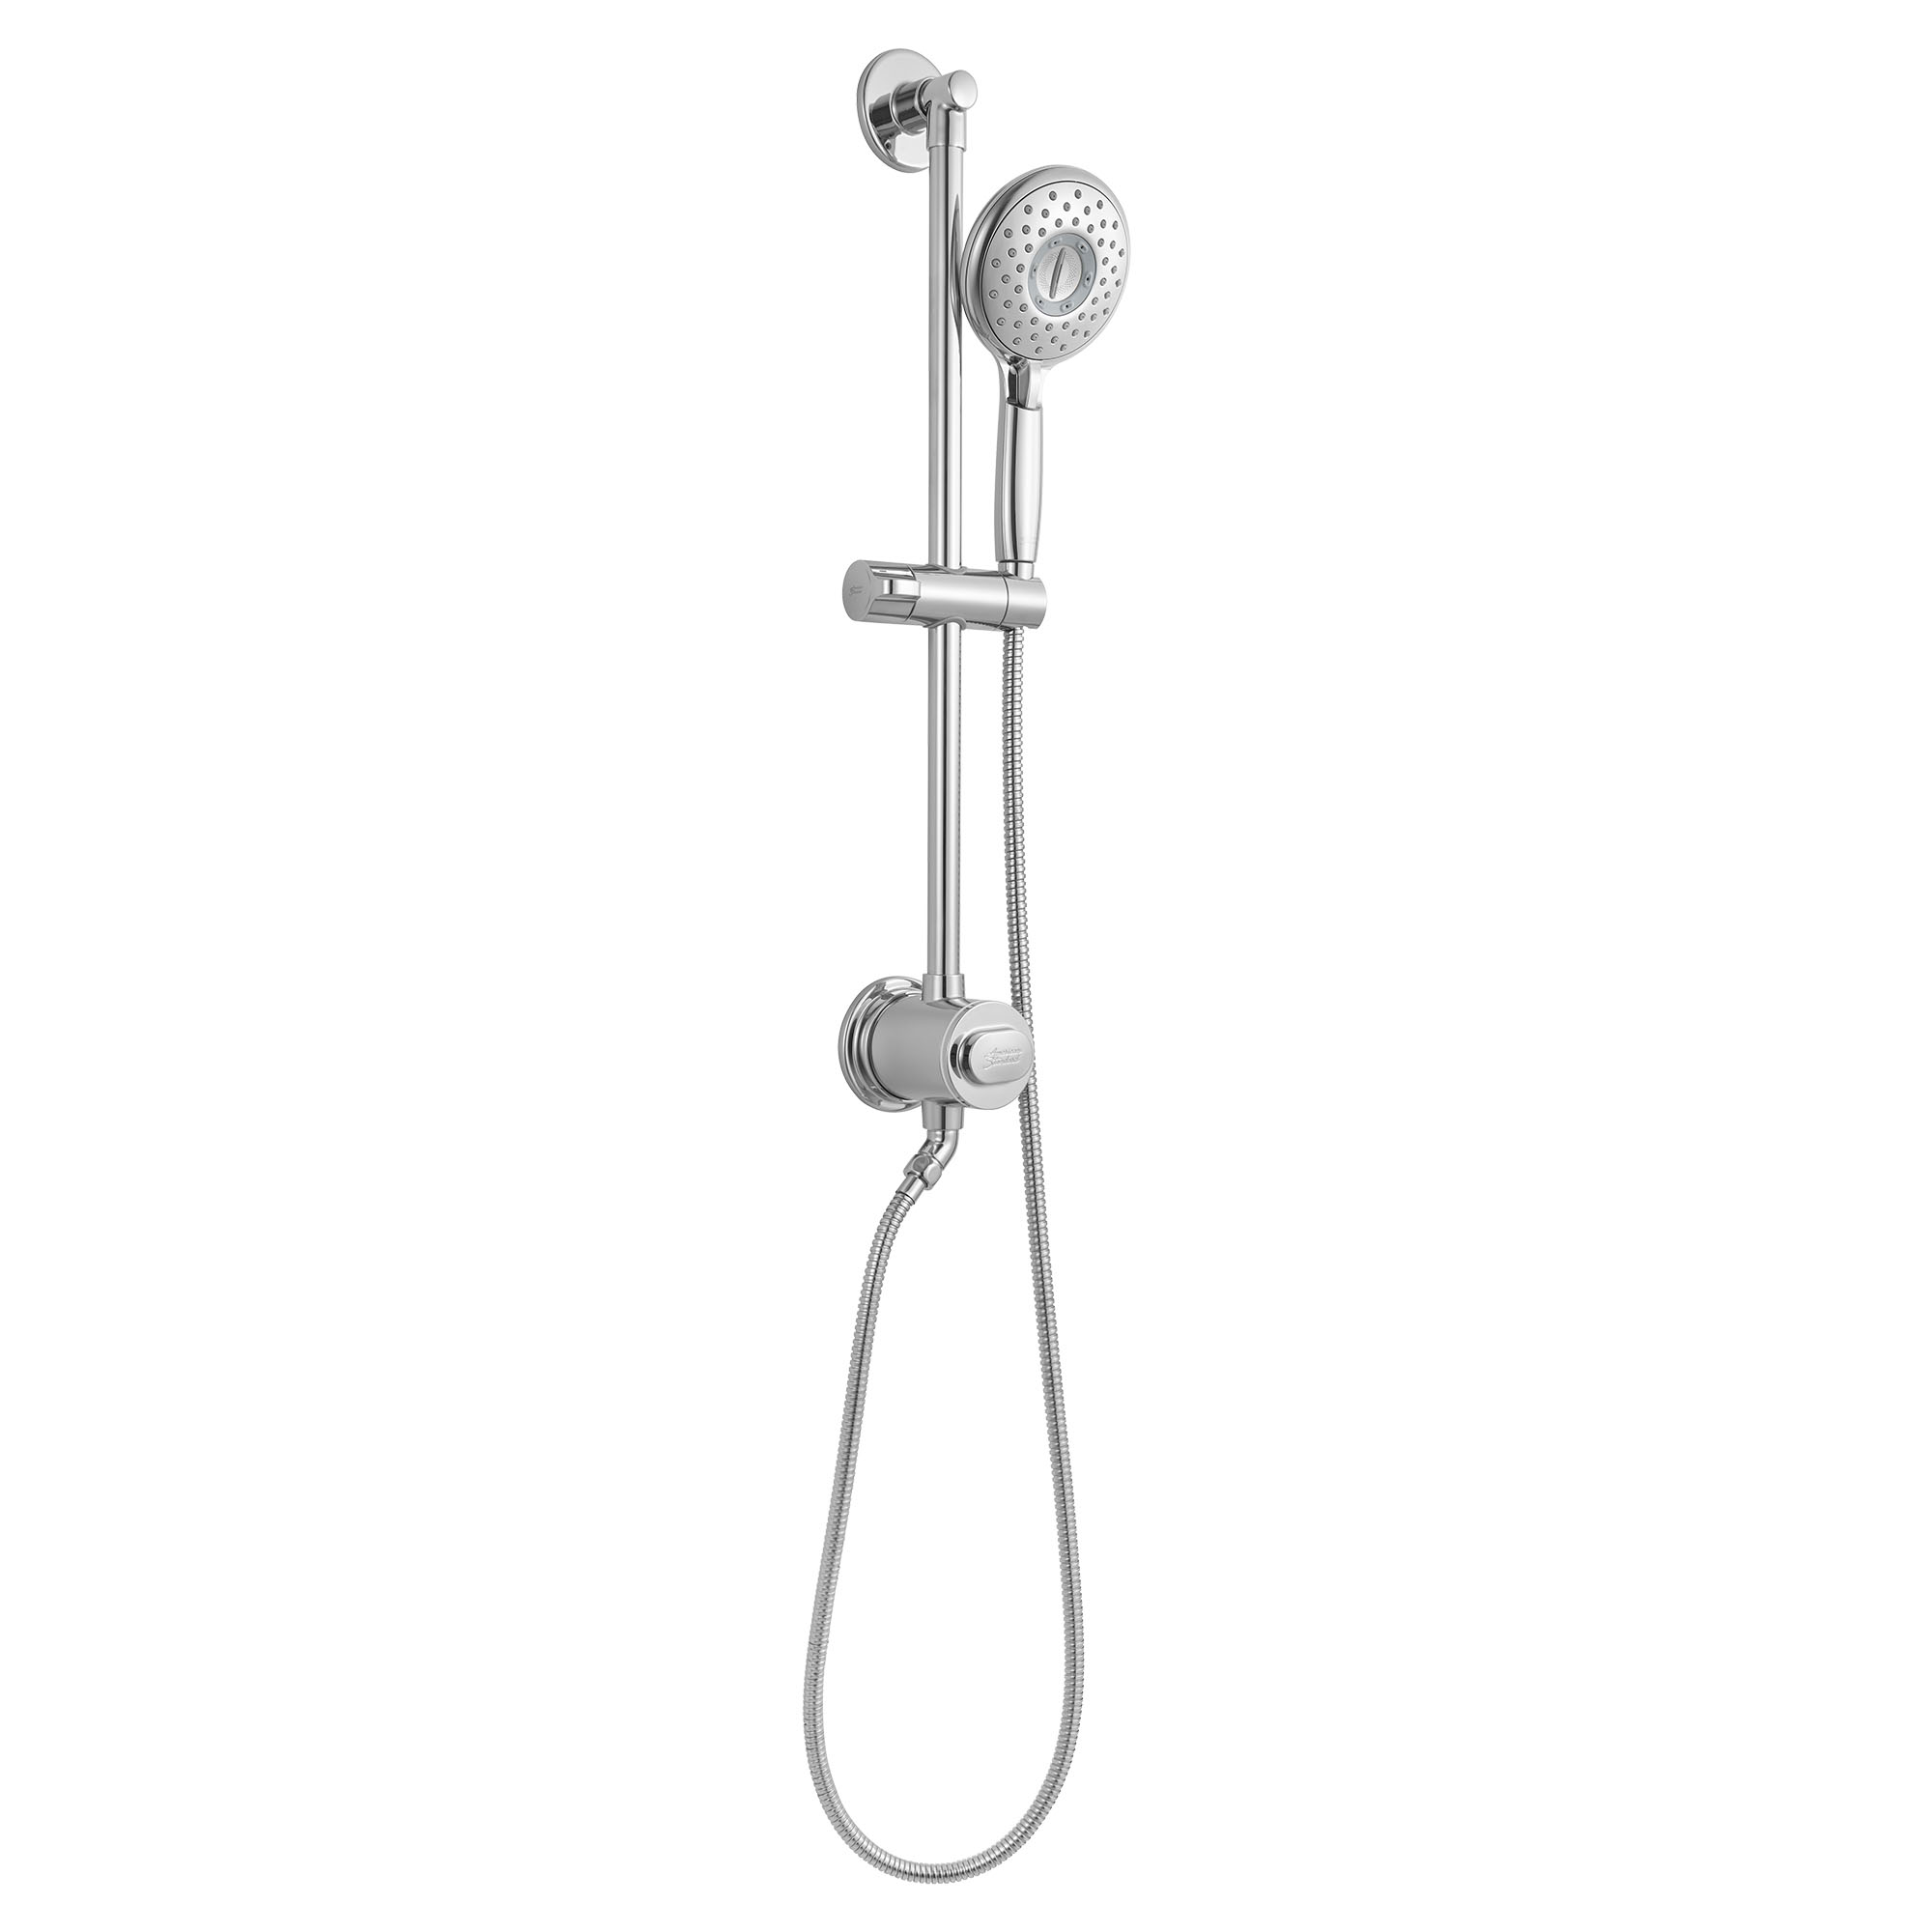 Spectra Filtered 4-Spray Hand Shower Rail System with 2nd Filter